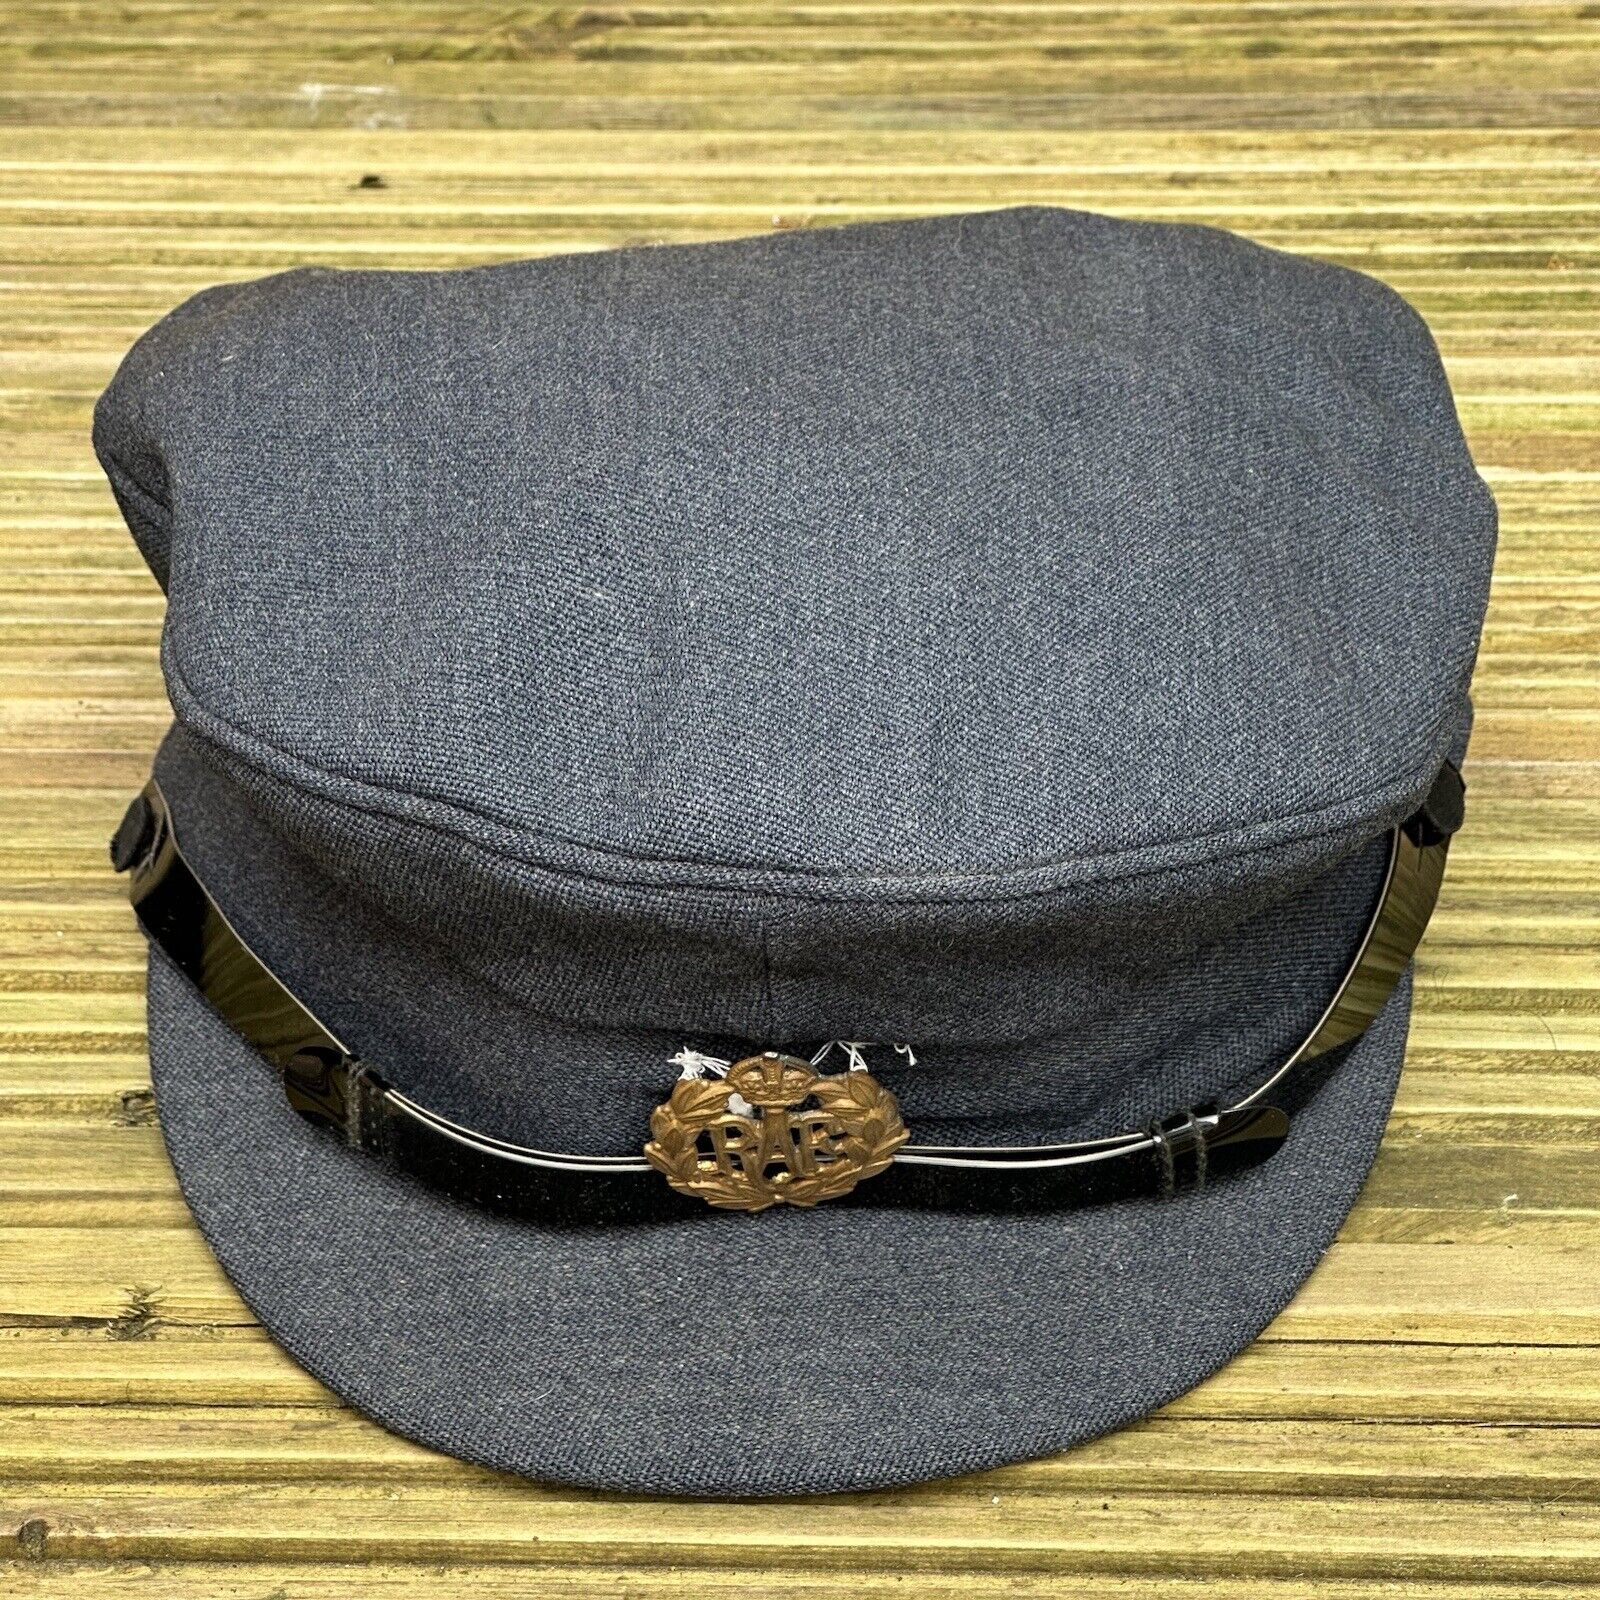 R.A.F. Royal Air Force  Peaked Cap Possibly Women’s by Gieves Re-enactment